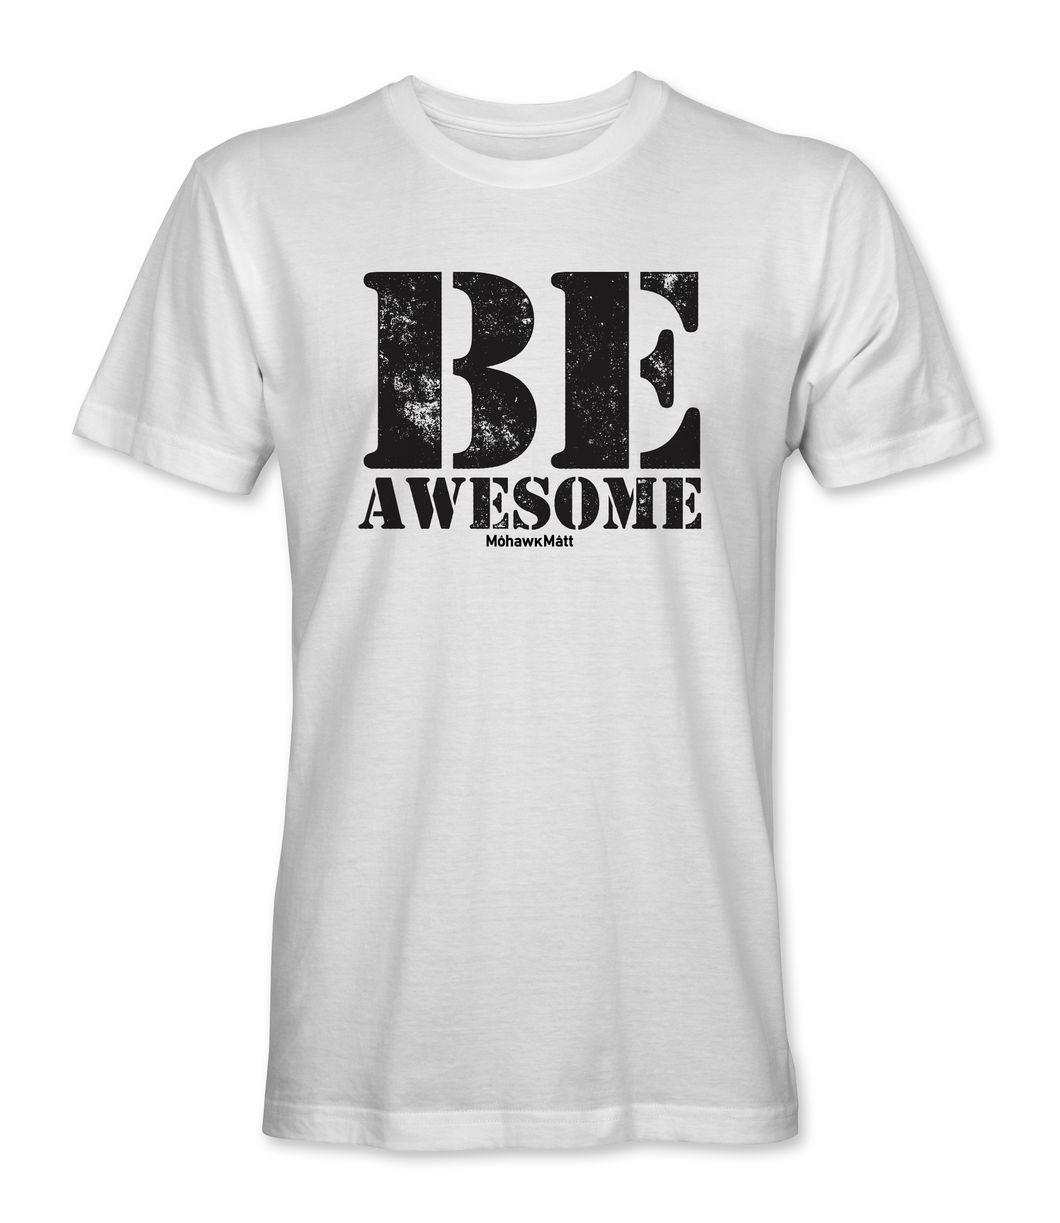 Be Awesome Stacked T-Shirt in Black or White